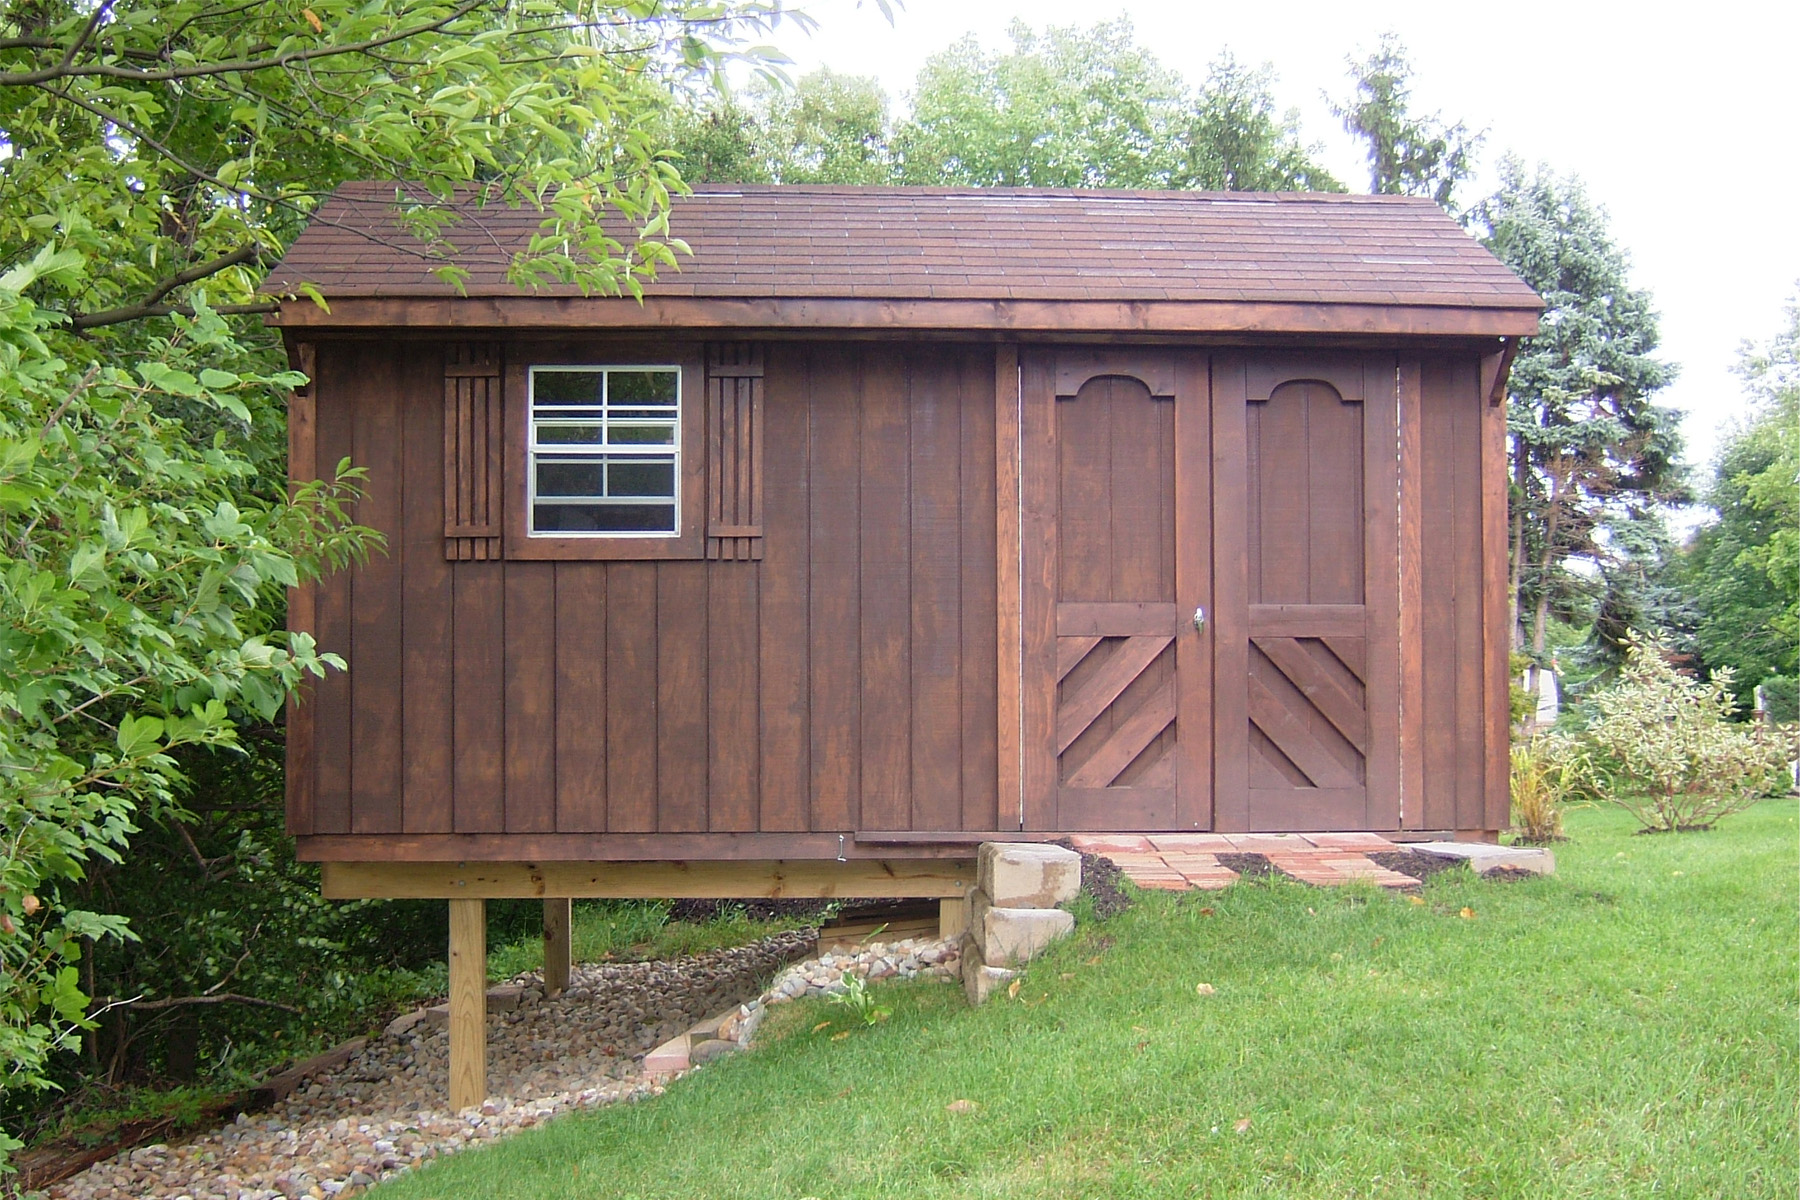 How to prepare your yard for your new shed | Storage ...